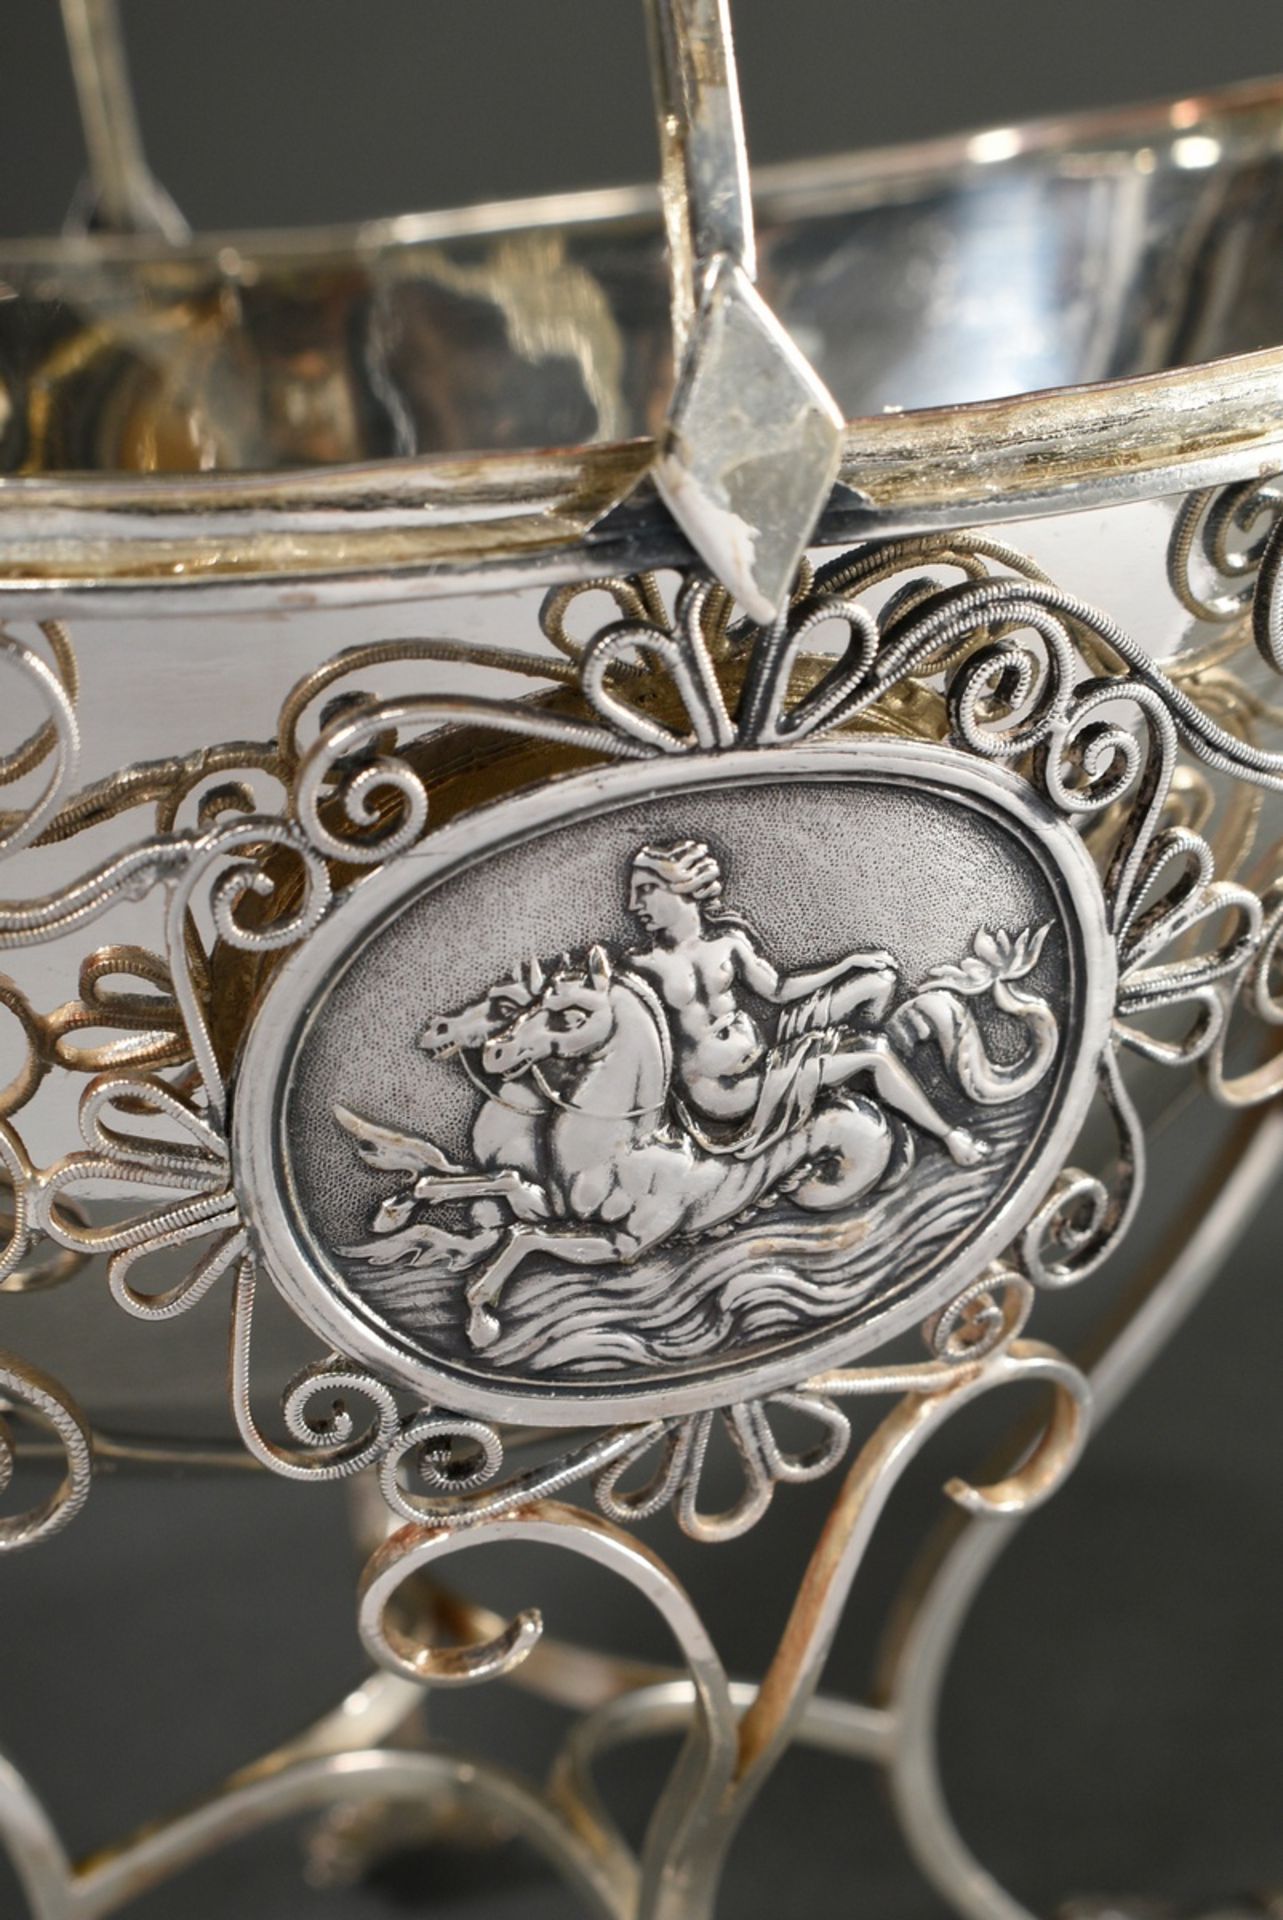 Classic Empire sugar basket with filigree work and oval relief fondi ‘Mythological scenes’, silver, - Image 2 of 4